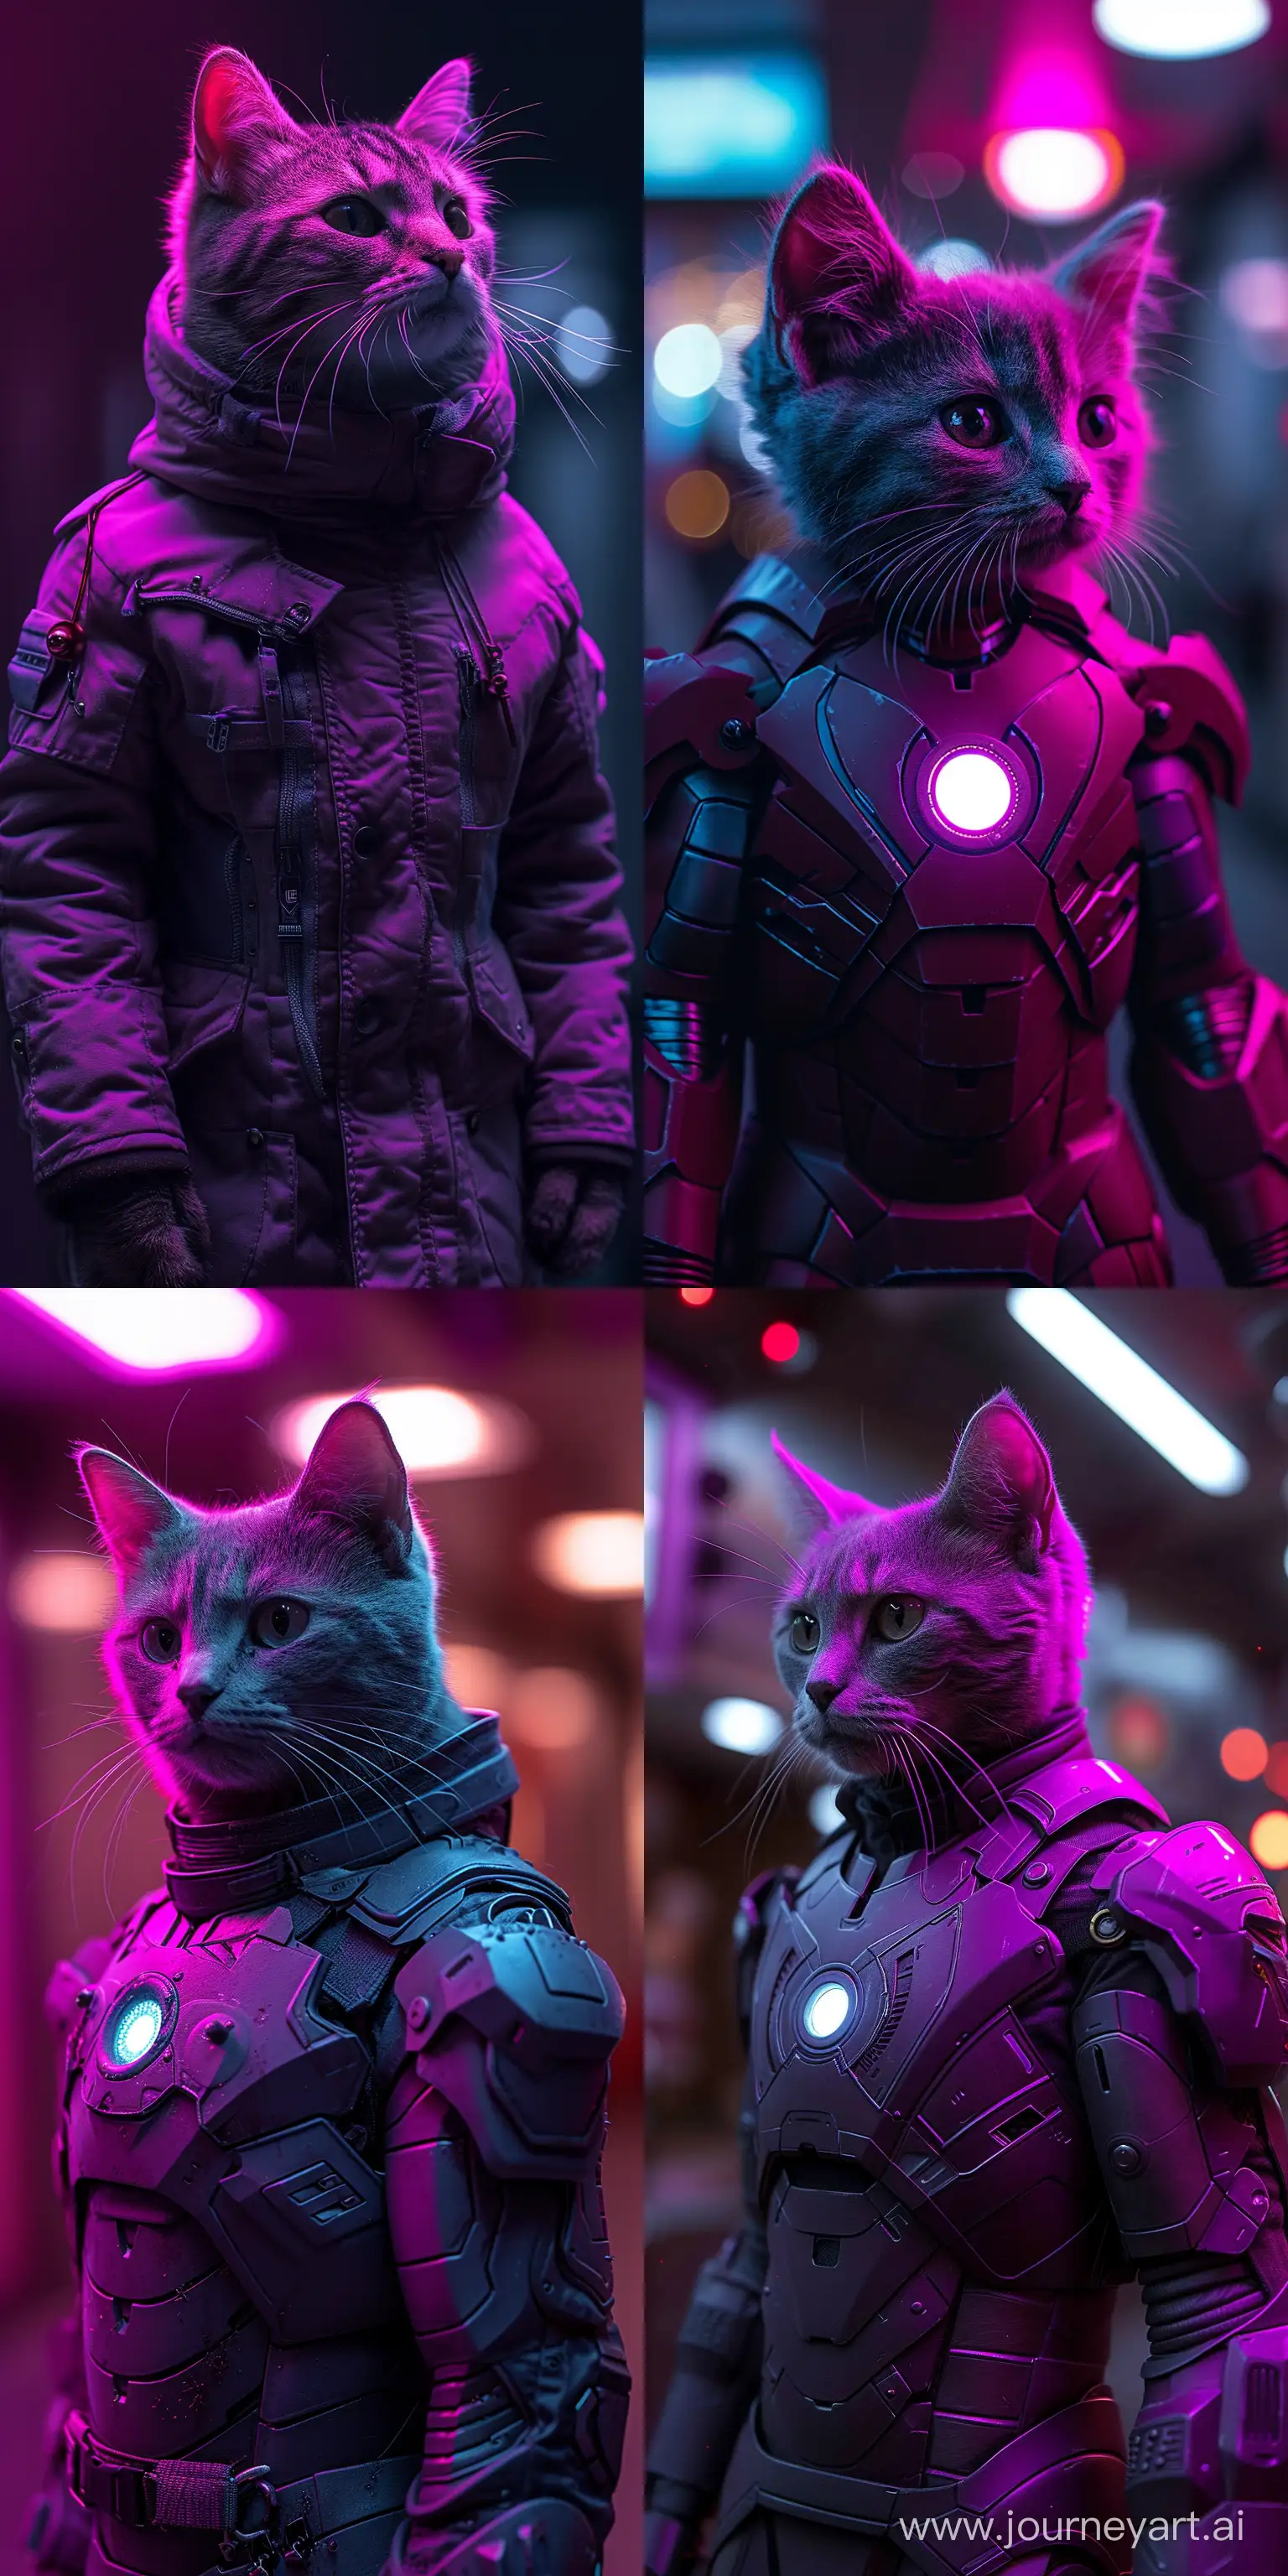 Majestic-Cat-in-Iron-Man-Suit-with-Cinematic-Purple-Hues